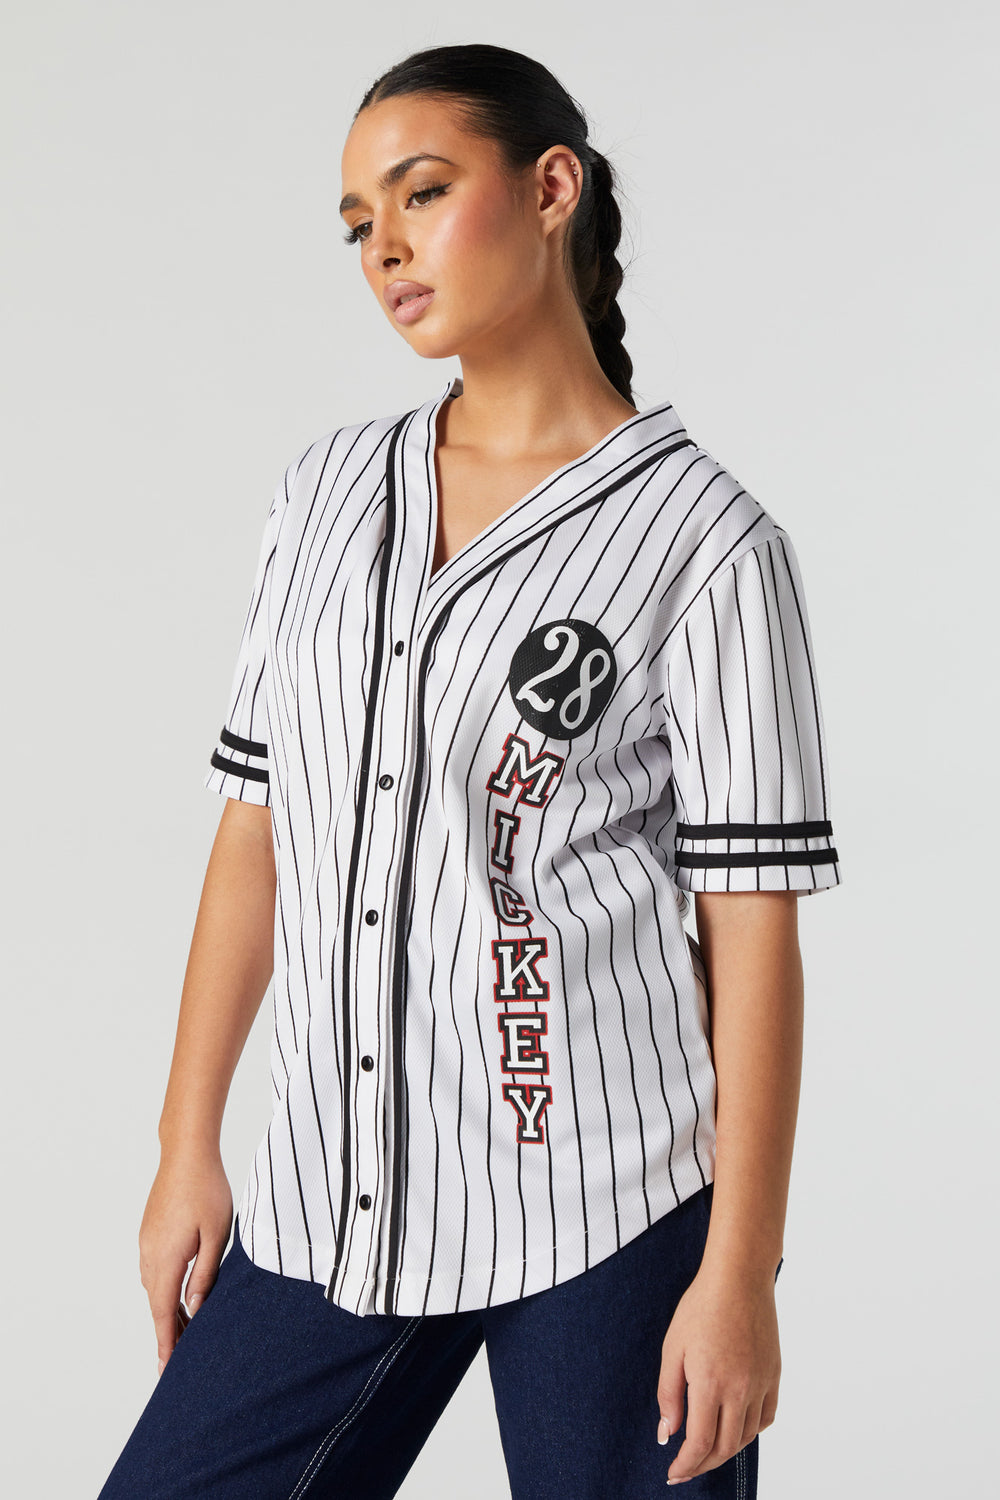 Pinstriped Mickey Mouse Graphic Baseball Jersey Pinstriped Mickey Mouse Graphic Baseball Jersey 2